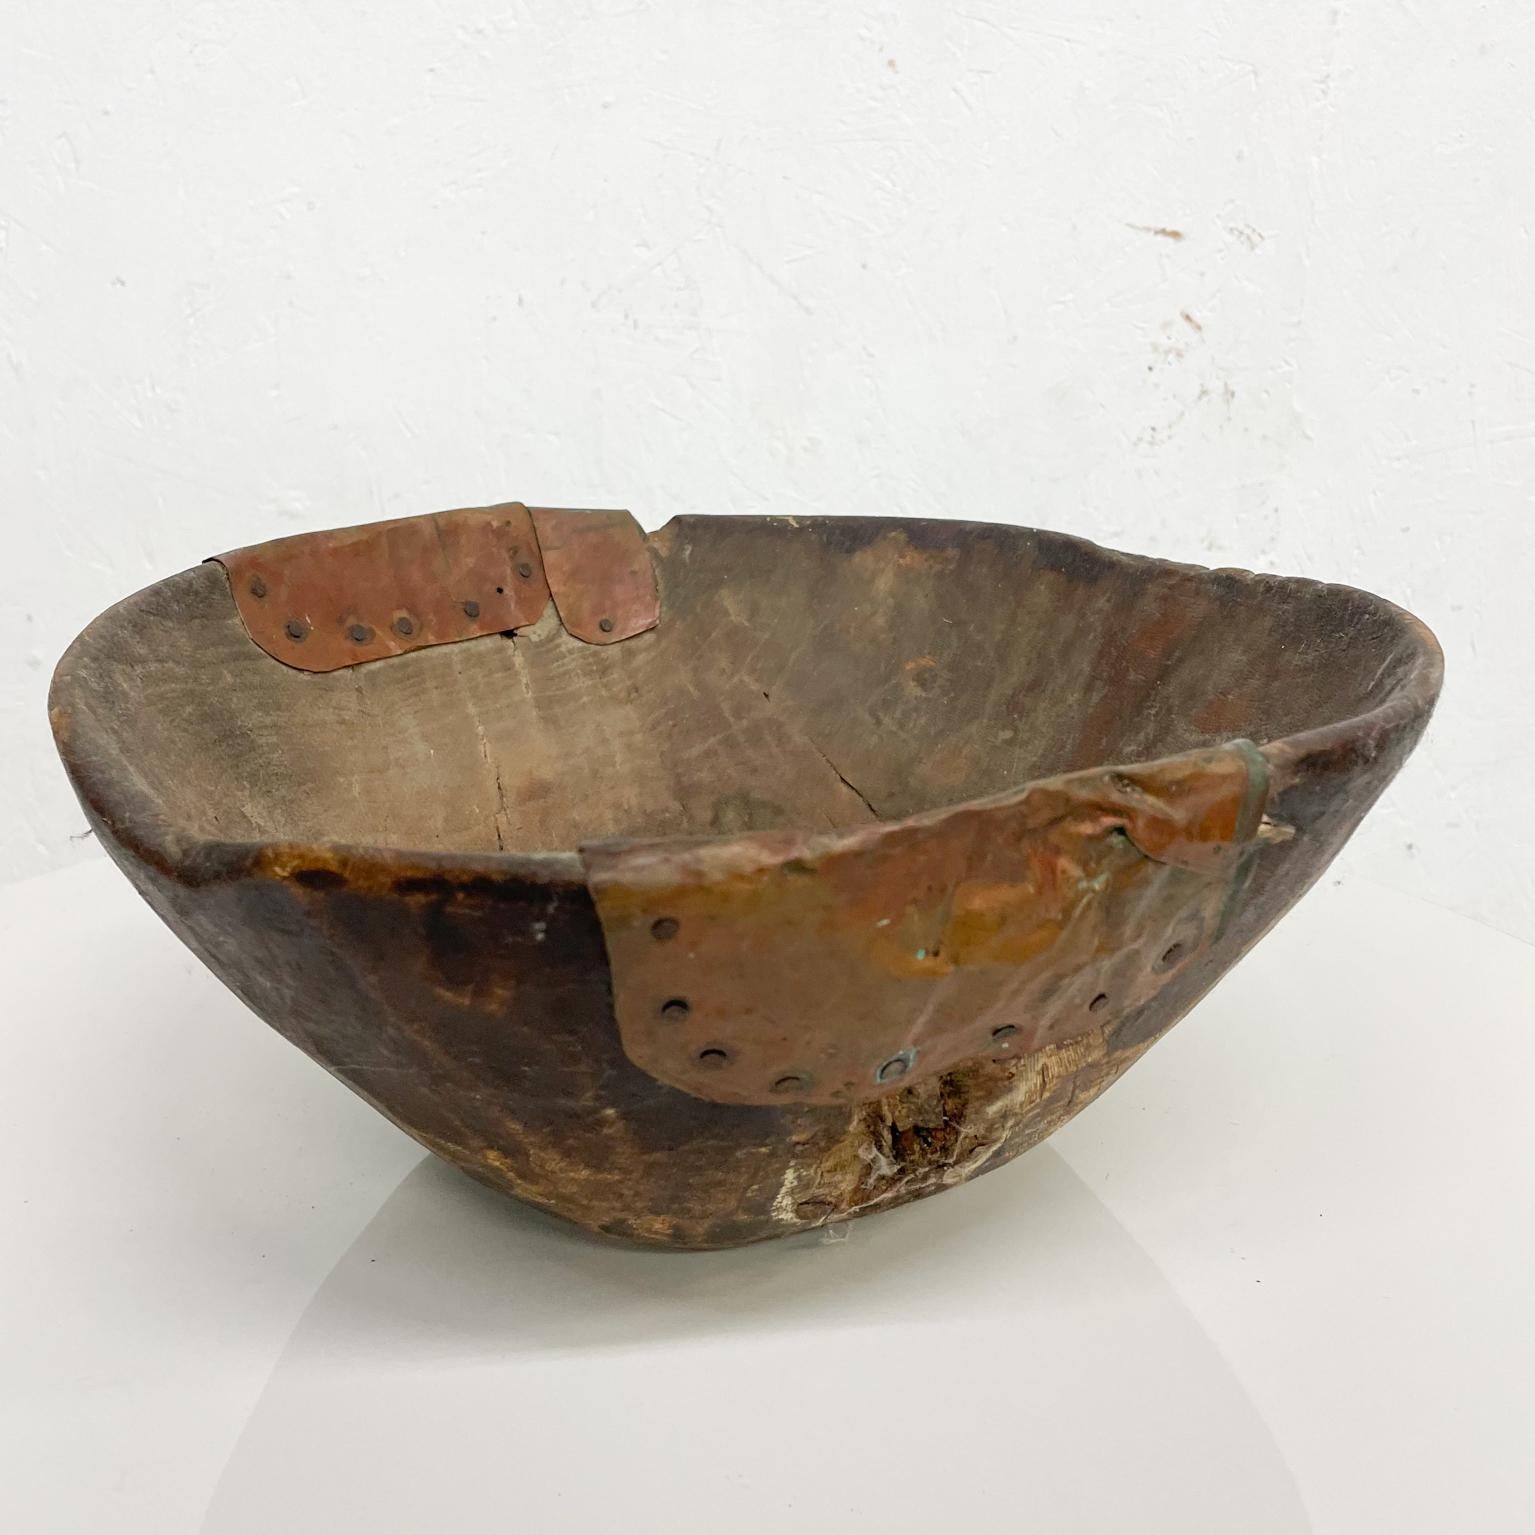 19th Century Handmade Sculptural Antique Rustic Wood Bowl with Decorative Copper